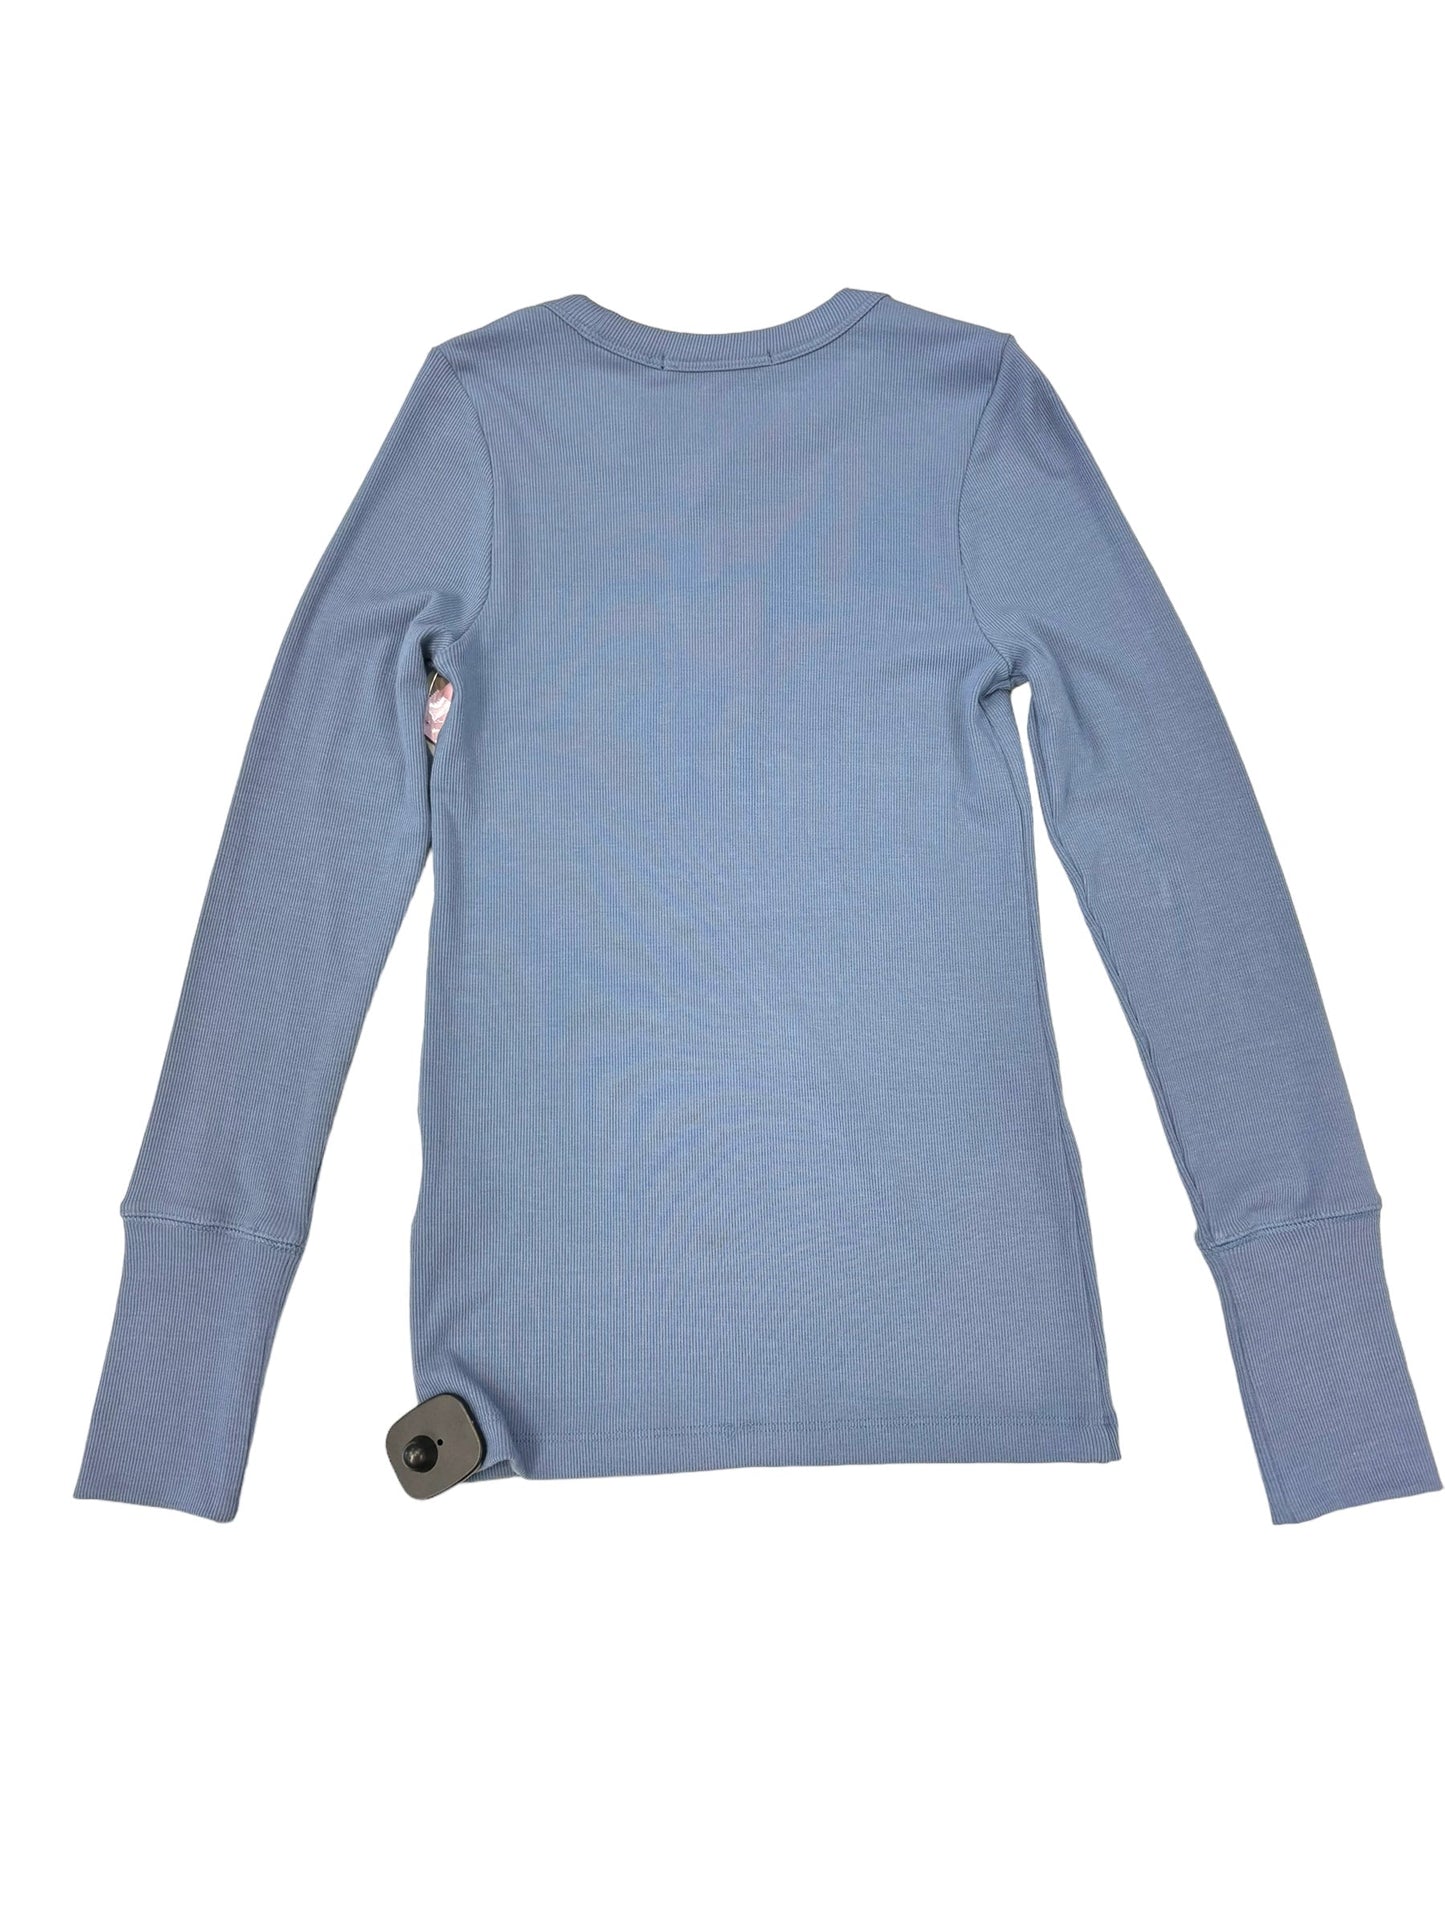 Blue Top Long Sleeve Cmb, Size M